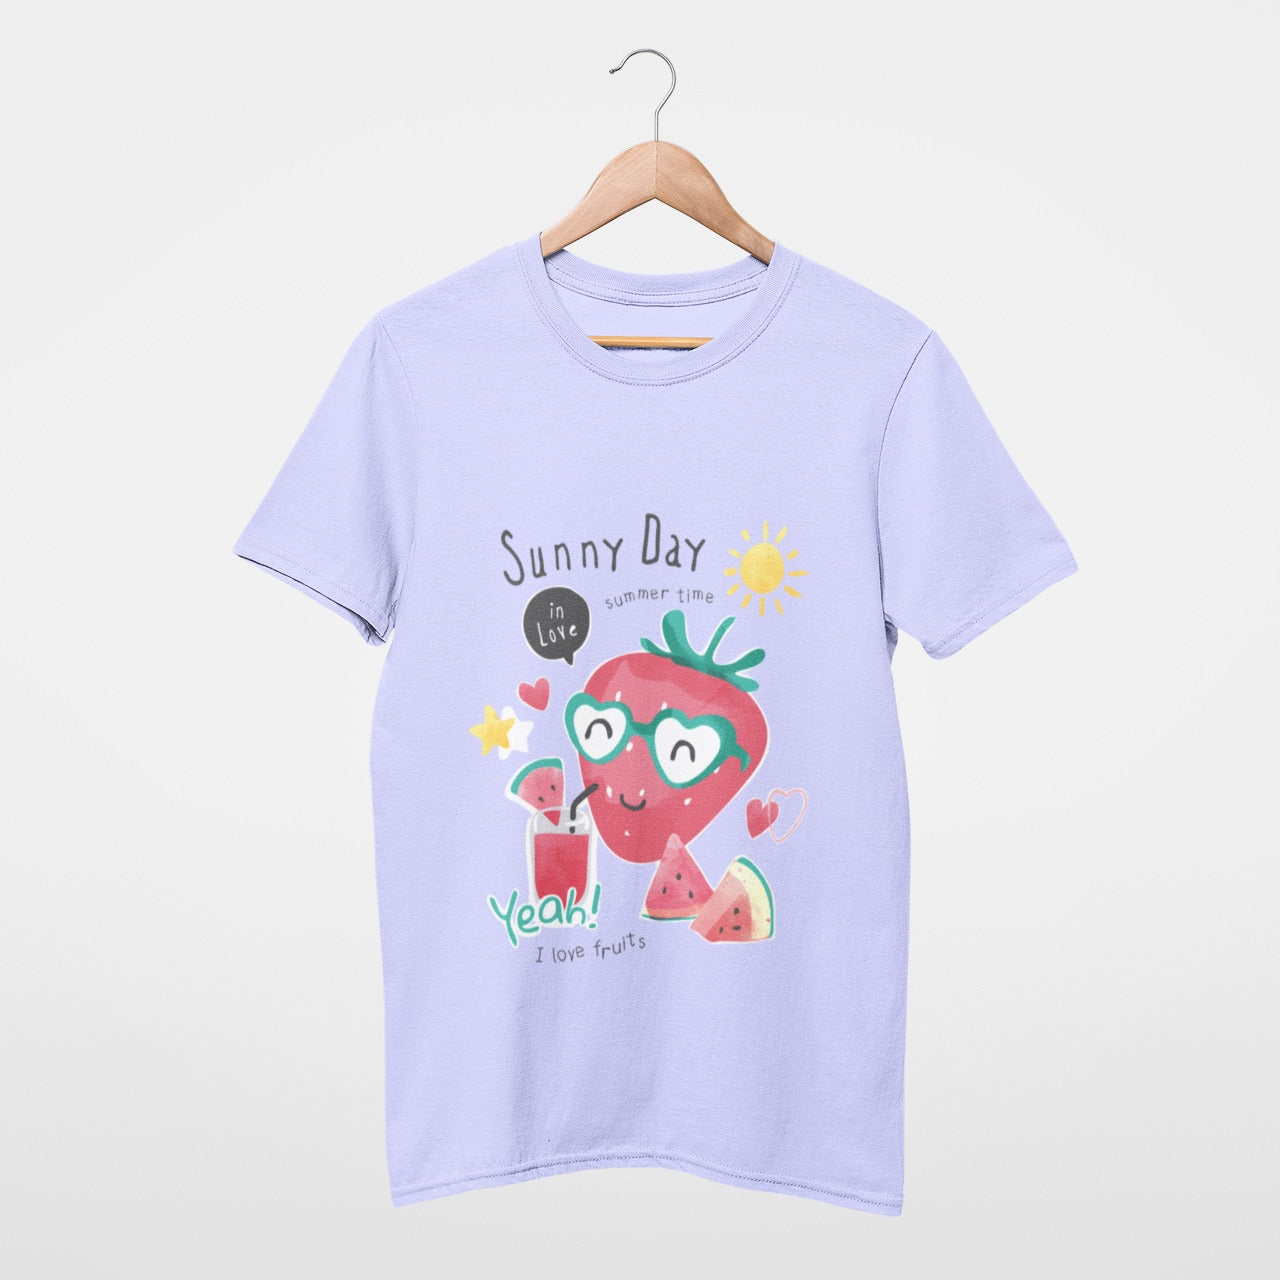 Sunny Day, summer time Tee